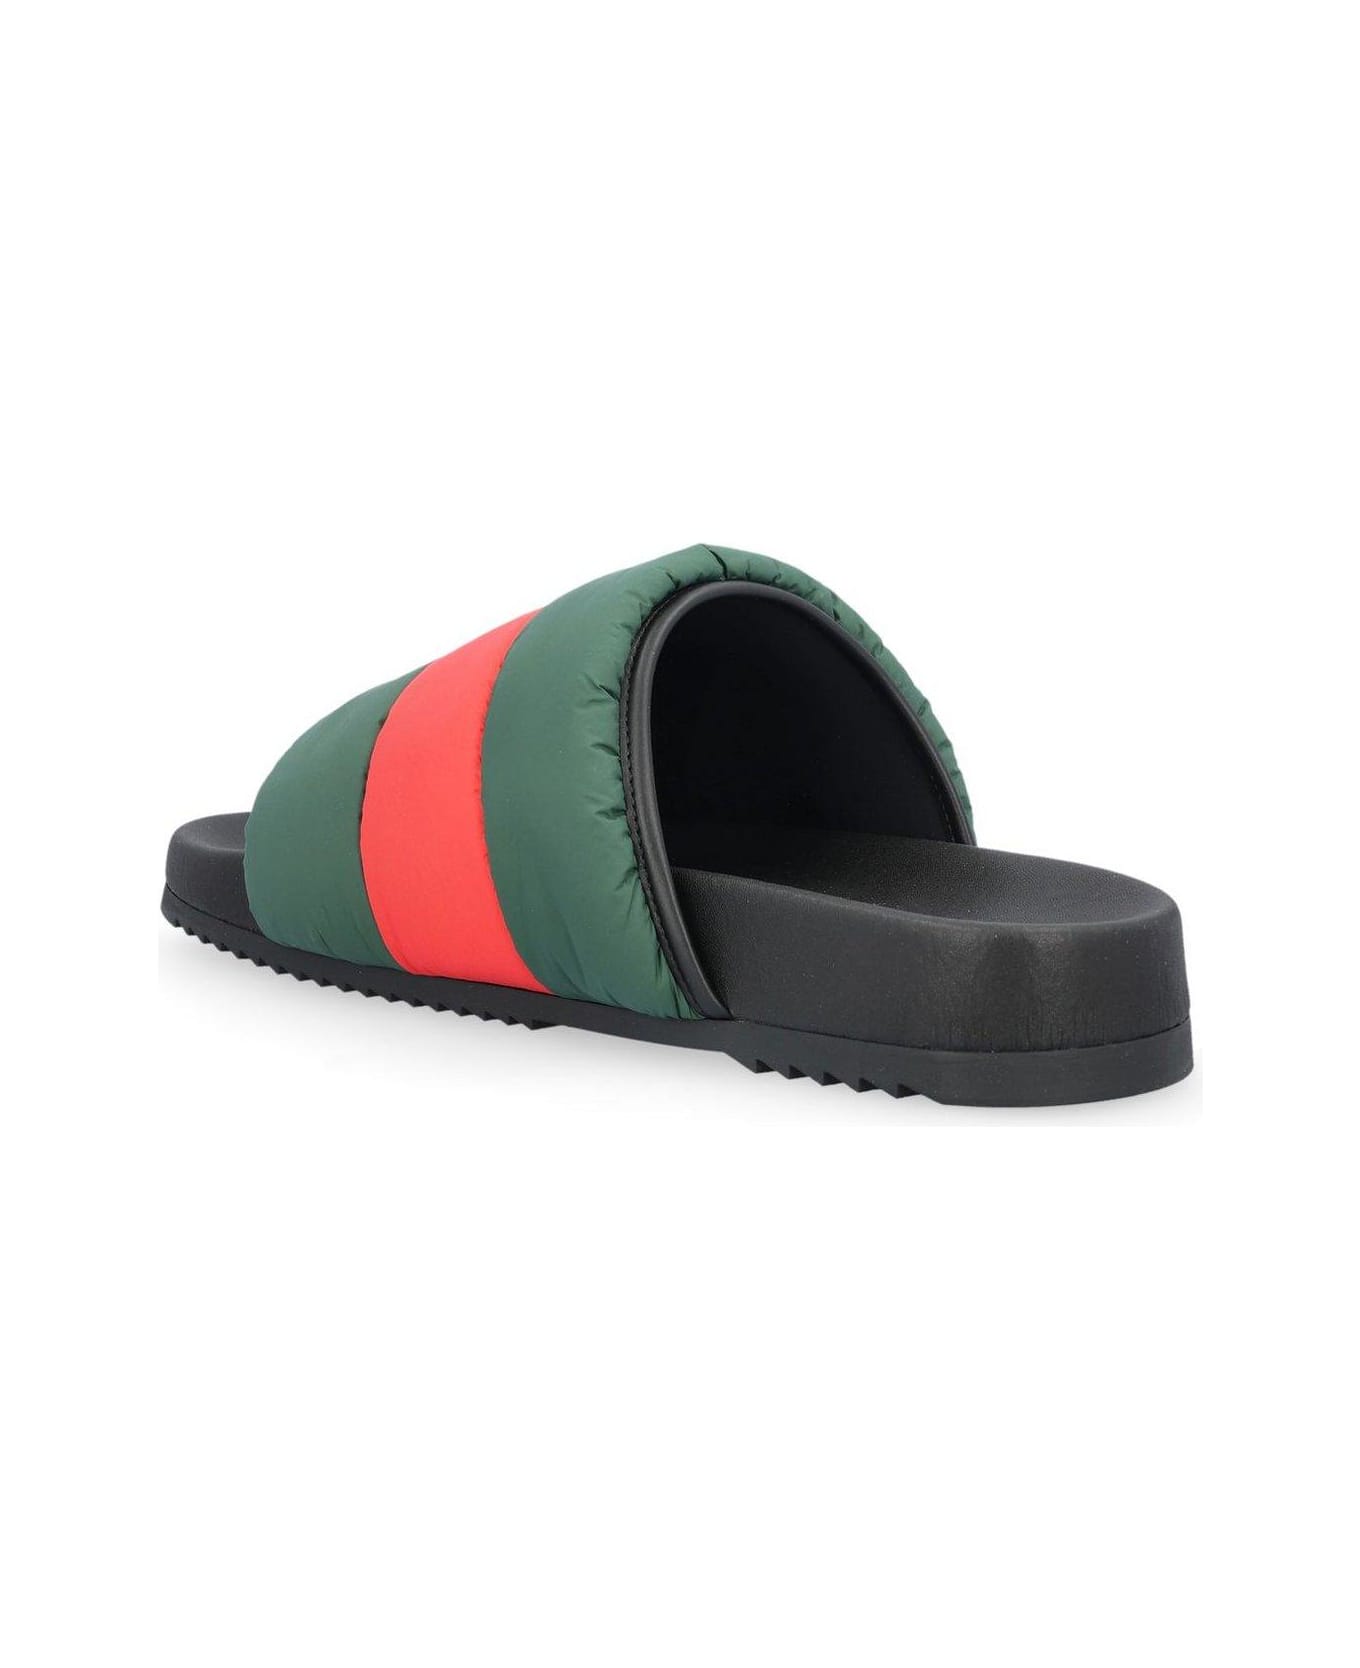 Gucci Padded Web Slide Sandals - Nero その他各種シューズ